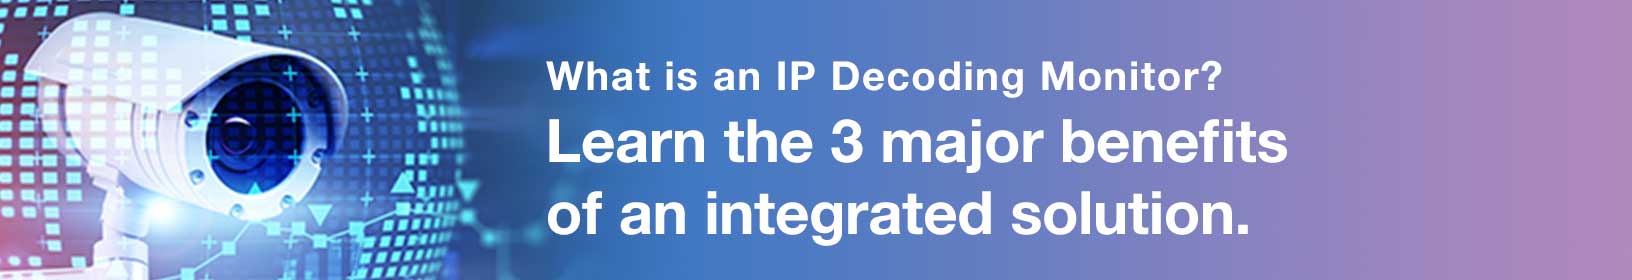 What is an IP Decoding Monitor?Learn the 3 major benefits of an integrated solution.